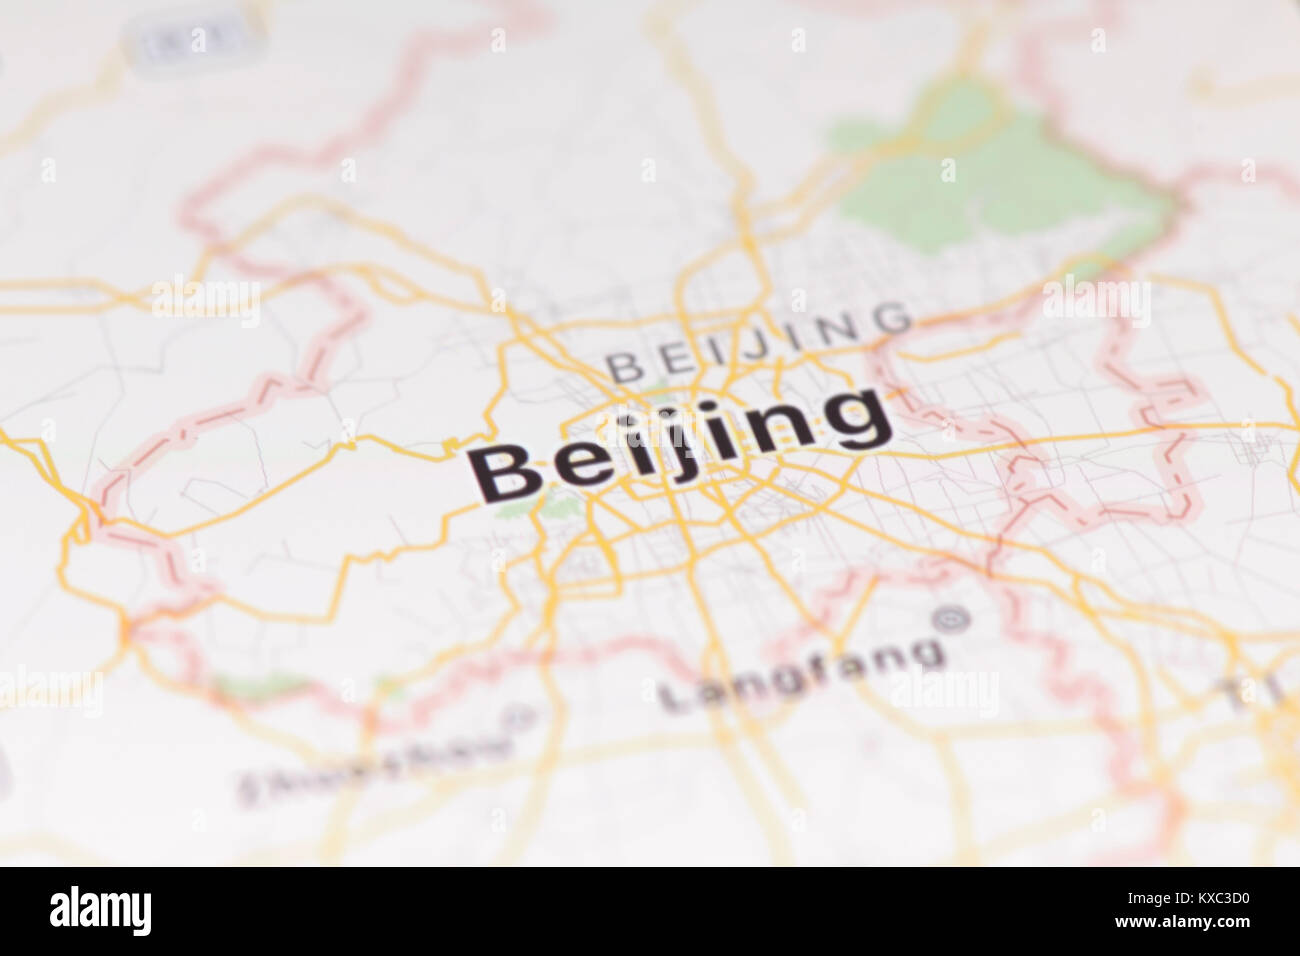 Closeup of Beijing city map on the screen of a GPS device, Apple iPhone maps app Stock Photo